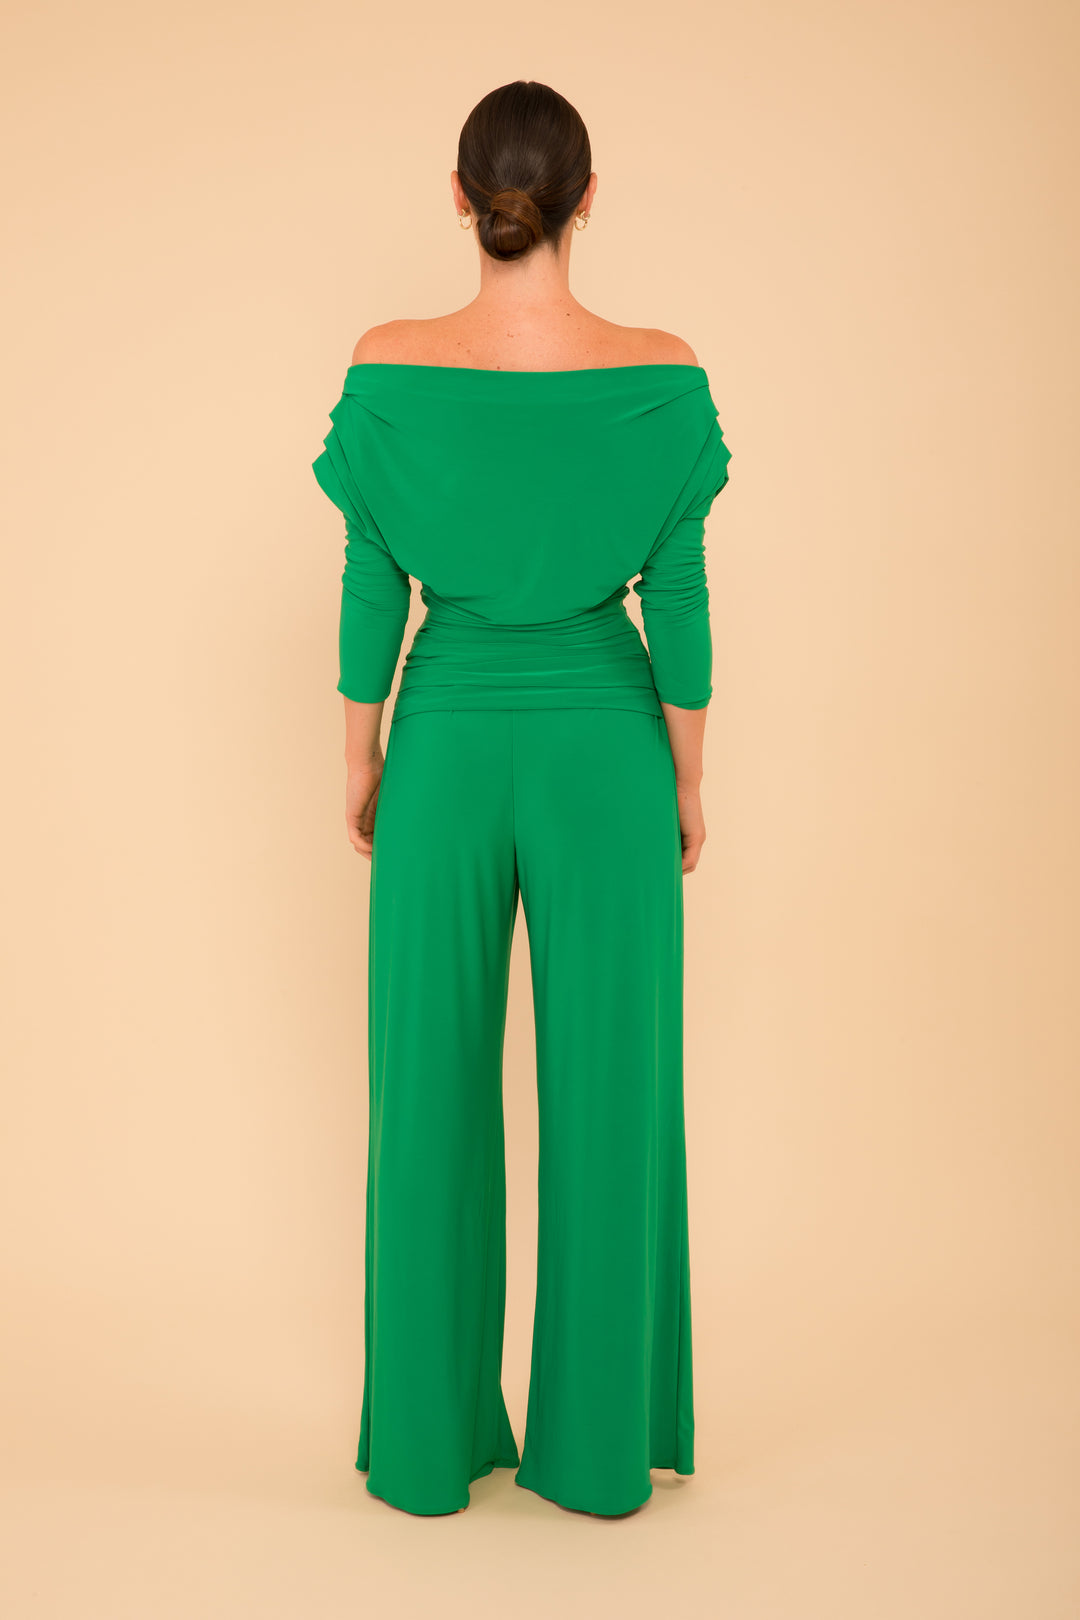 ATOM LABEL carbon jumpsuit with sleeve in emerald green